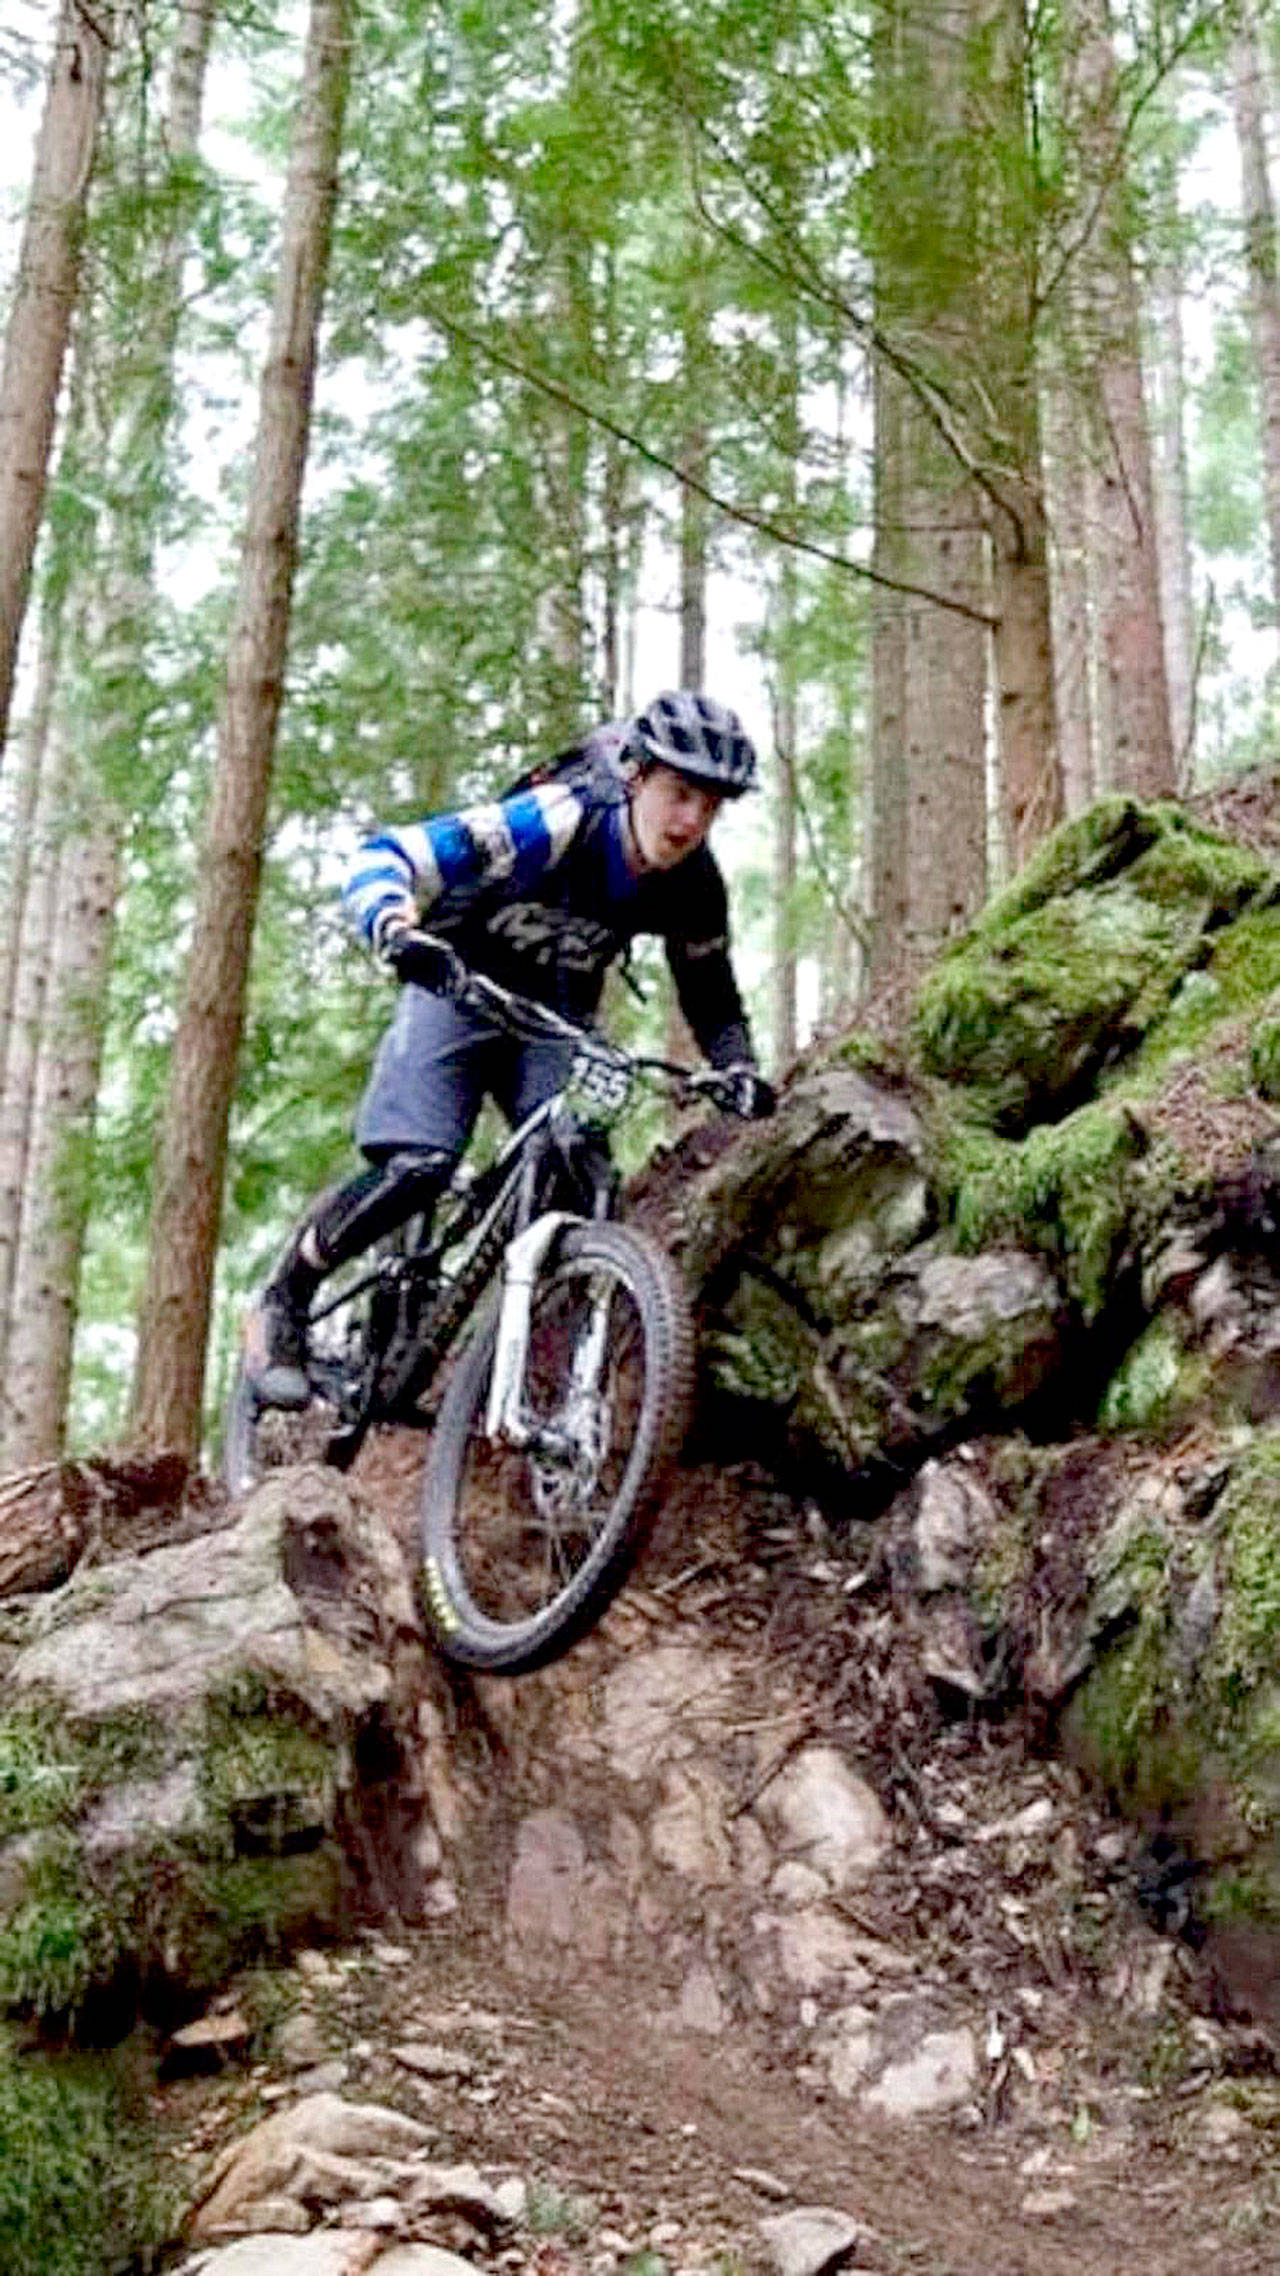 Mount Si Mountain Biker Jakob Freudenberg eases over a drop in the Tiger Mountain Enduro race earlier this year. He claimed a spot on the podium for his race. (Courtesy Photo)                                Courtesy Photo                                 Mount Si Mountain Biker Jakob Freudenberg eases over a drop in the Tiger Mountain Enduro race earlier this year. He claimed a spot on the podium for his race.